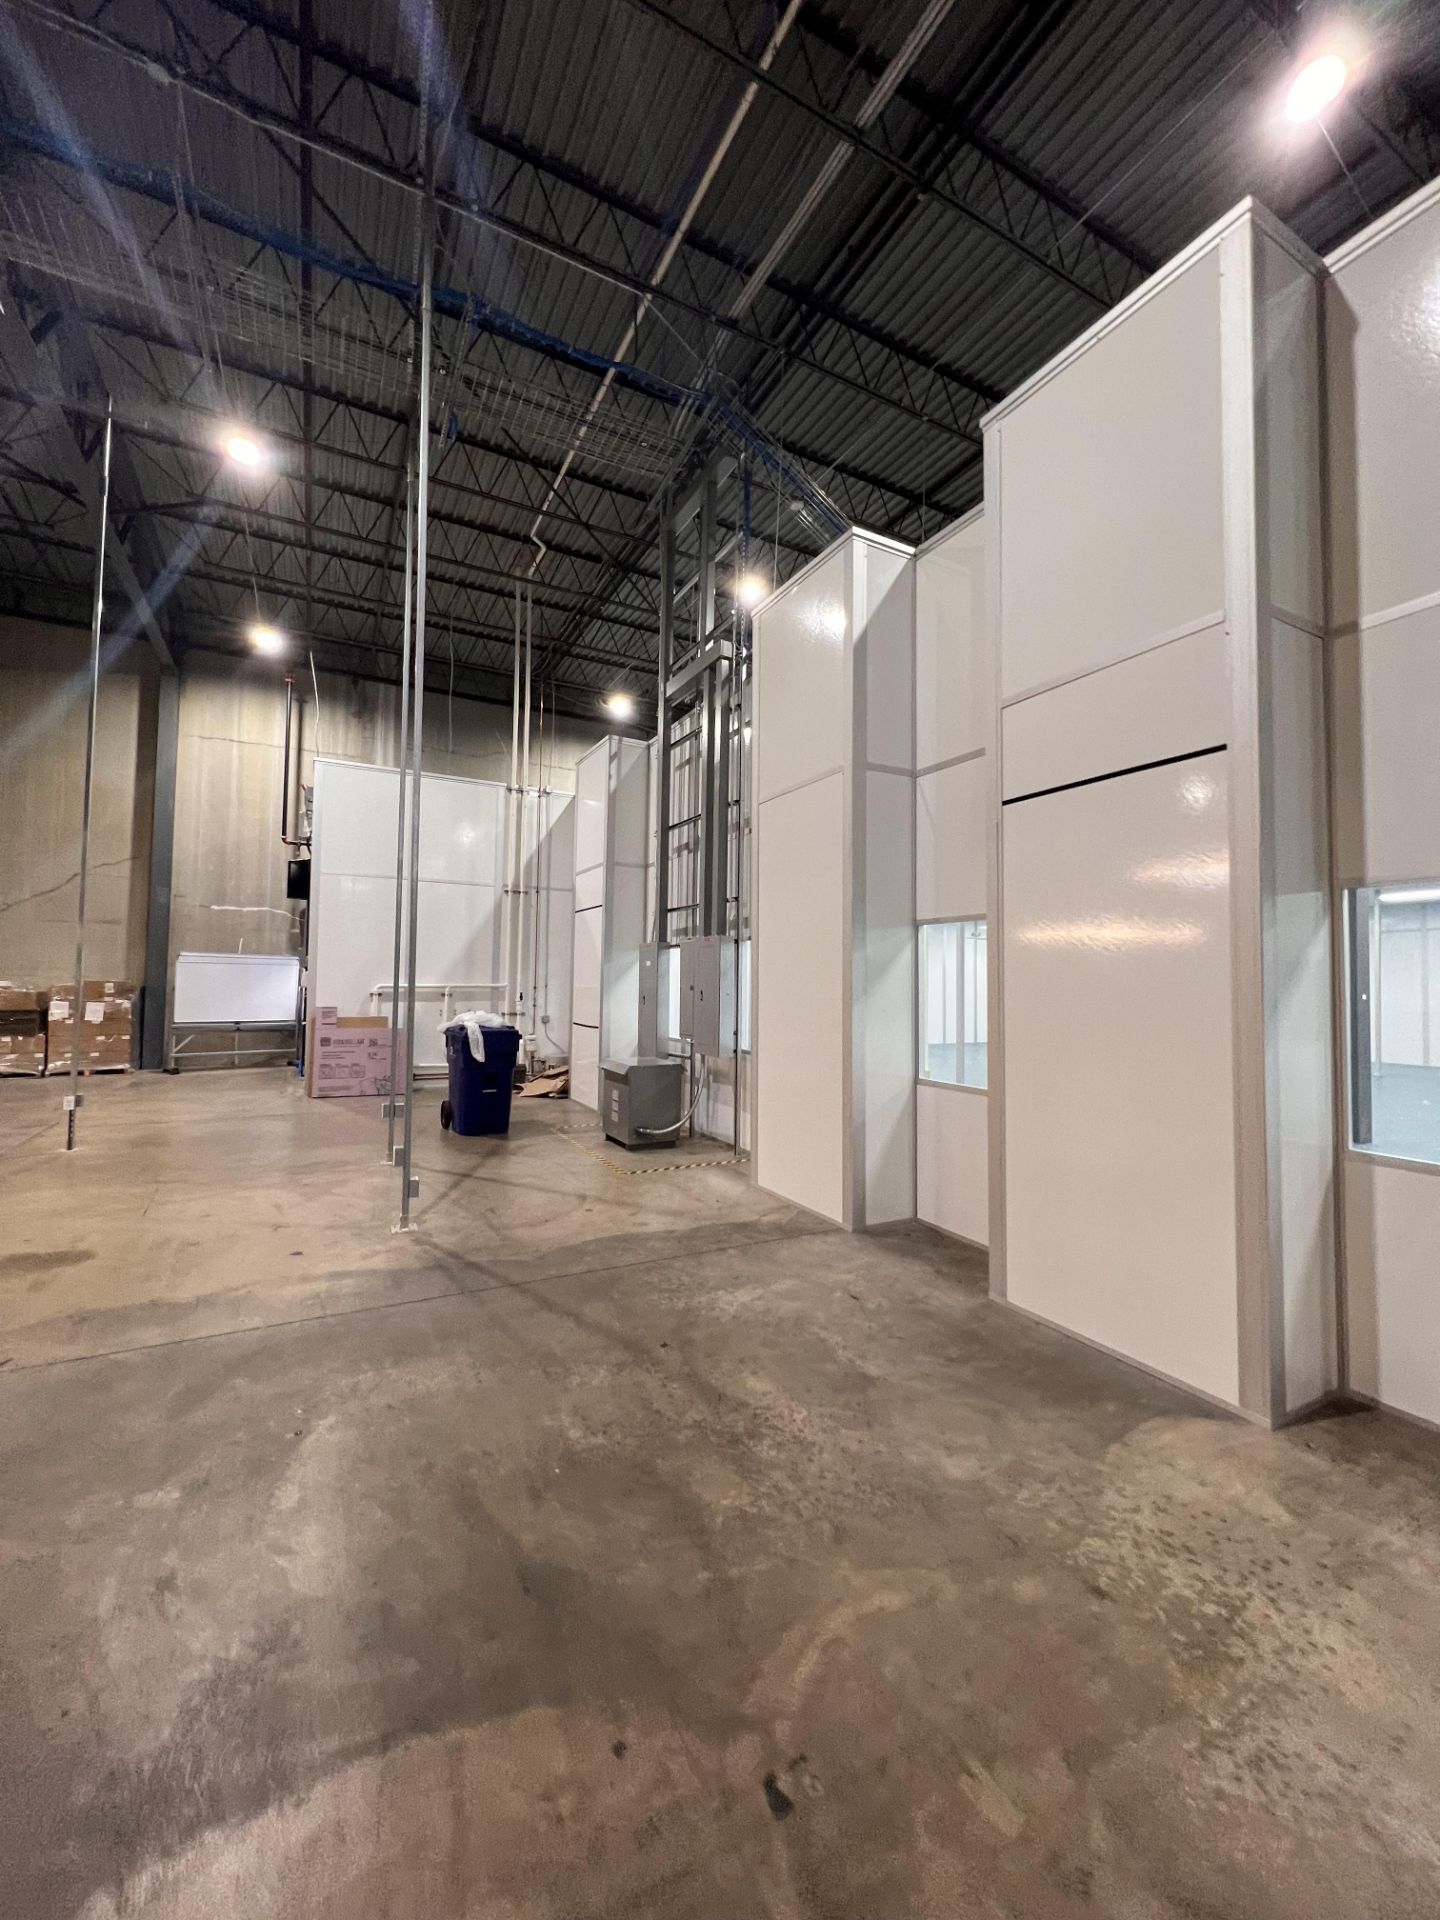 MODULAR CLEAN ROOM, APPROX. 60 FT X 60 FT X 11 FT 10 IN, INCLUDES HEPA FILTRATION UNITS - Image 12 of 34